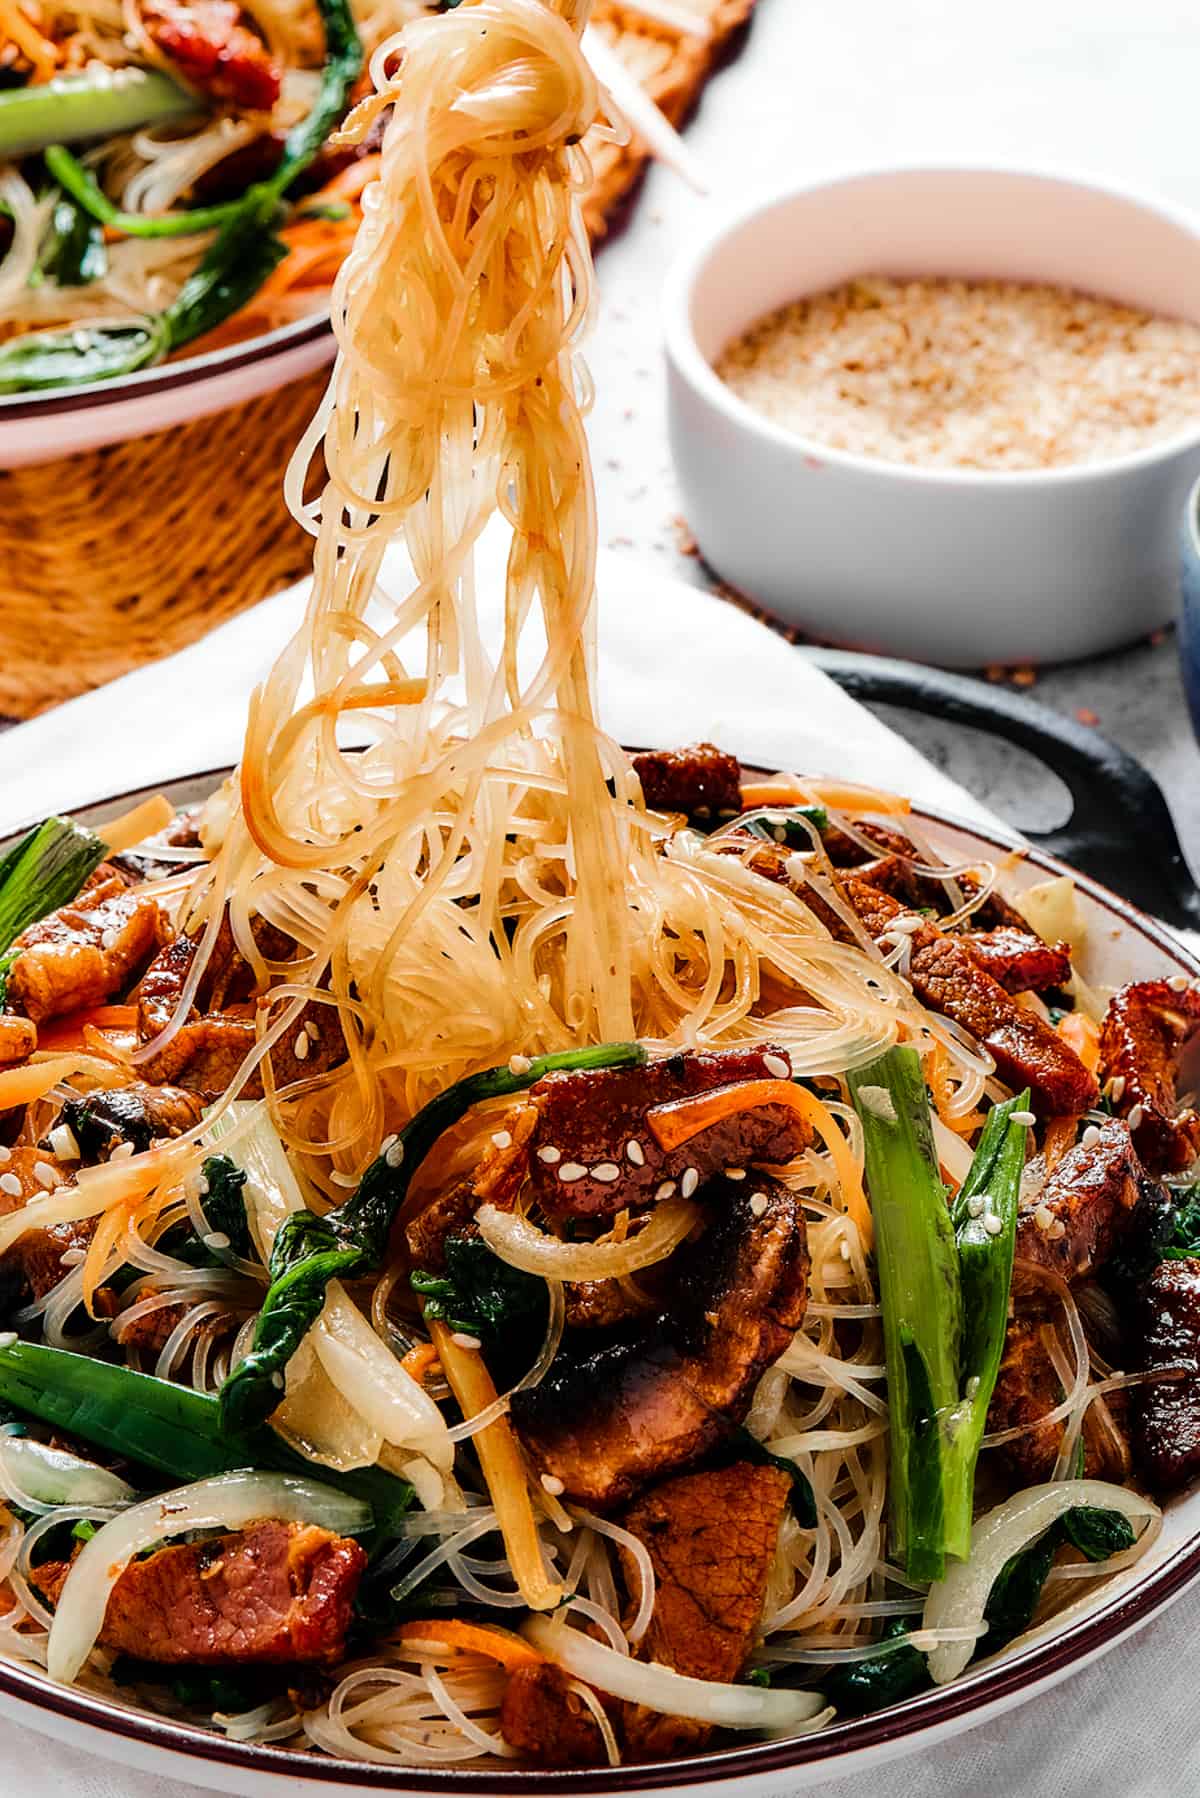 A bowl of beef stir fry with glass noodles. Some of the noodles are being lifted from the bowl with chopsticks.